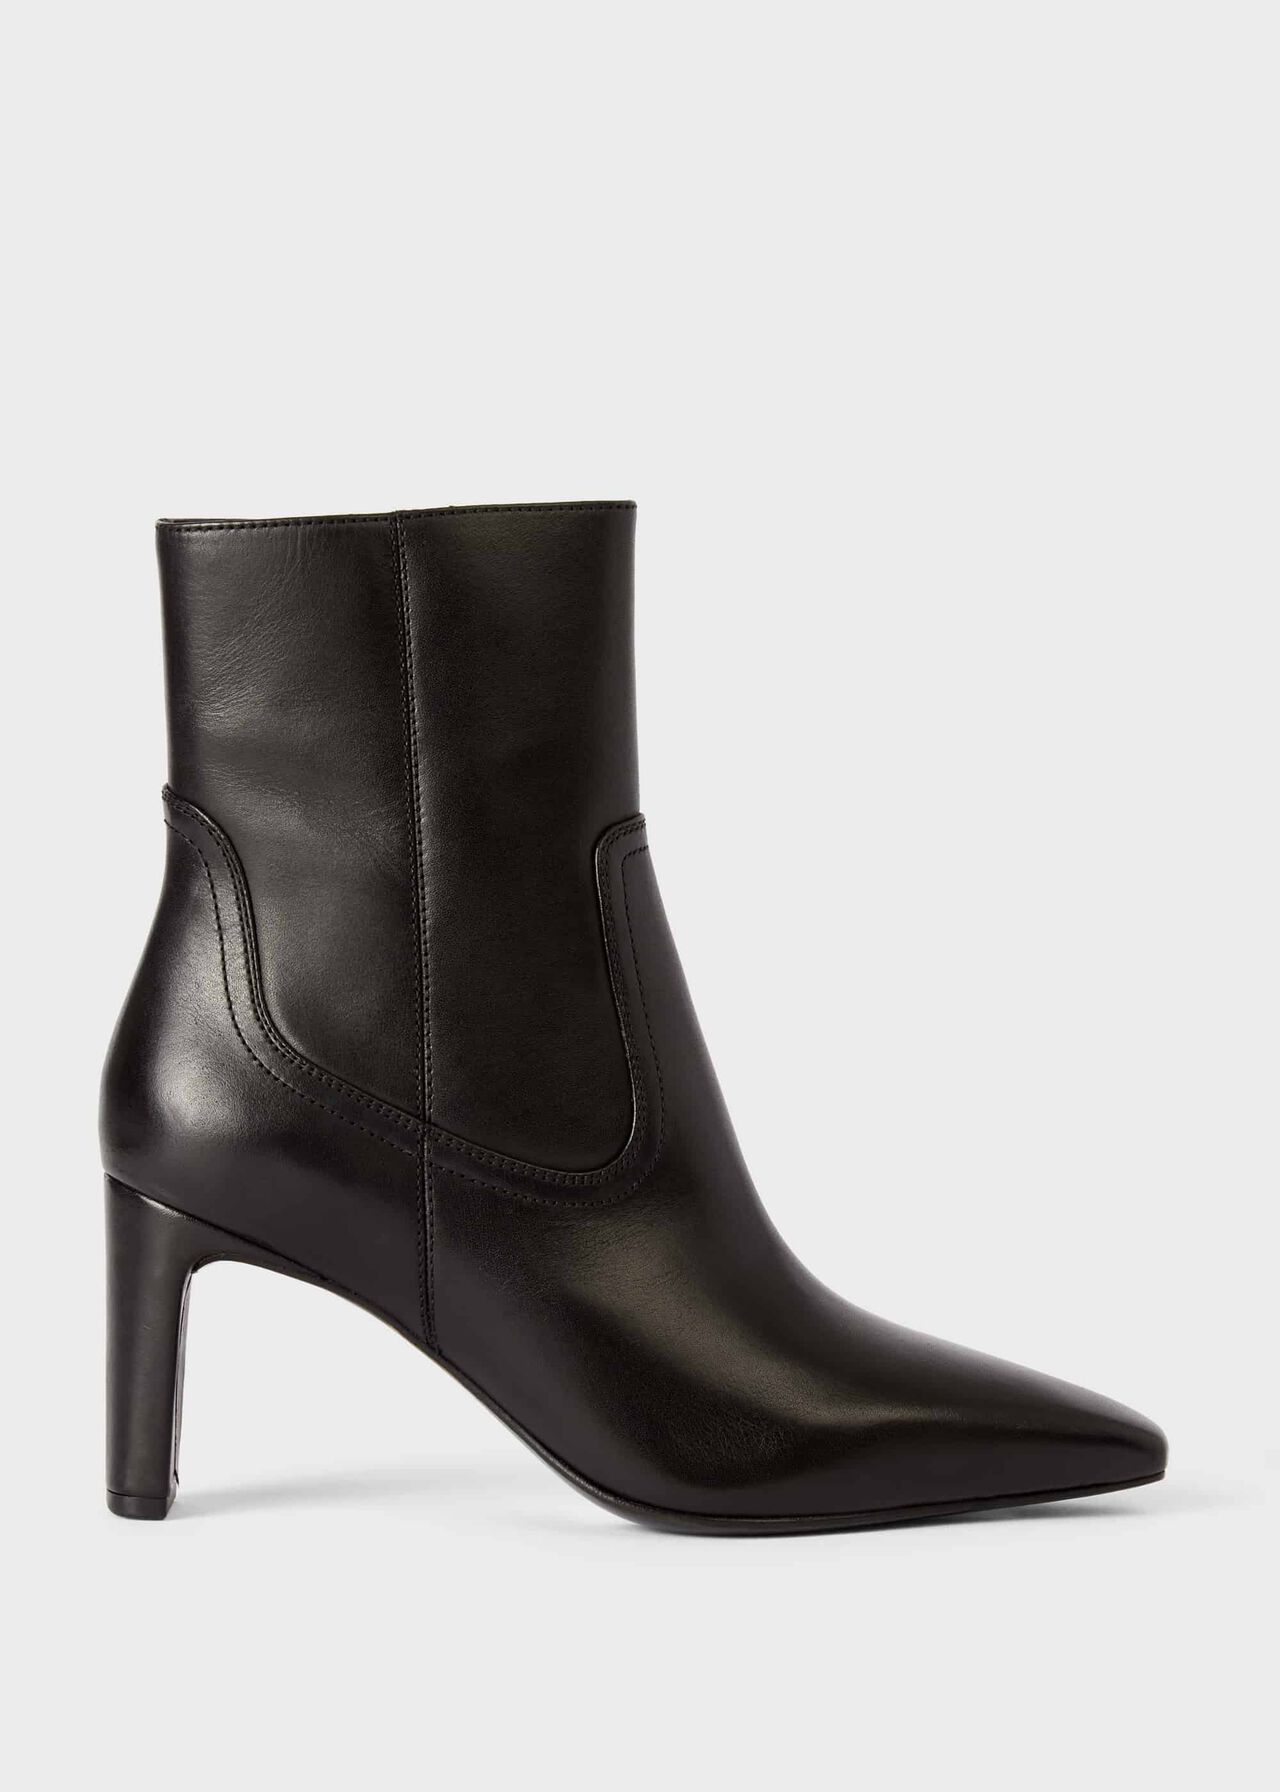 Fiona Ankle Boots, Black, hi-res